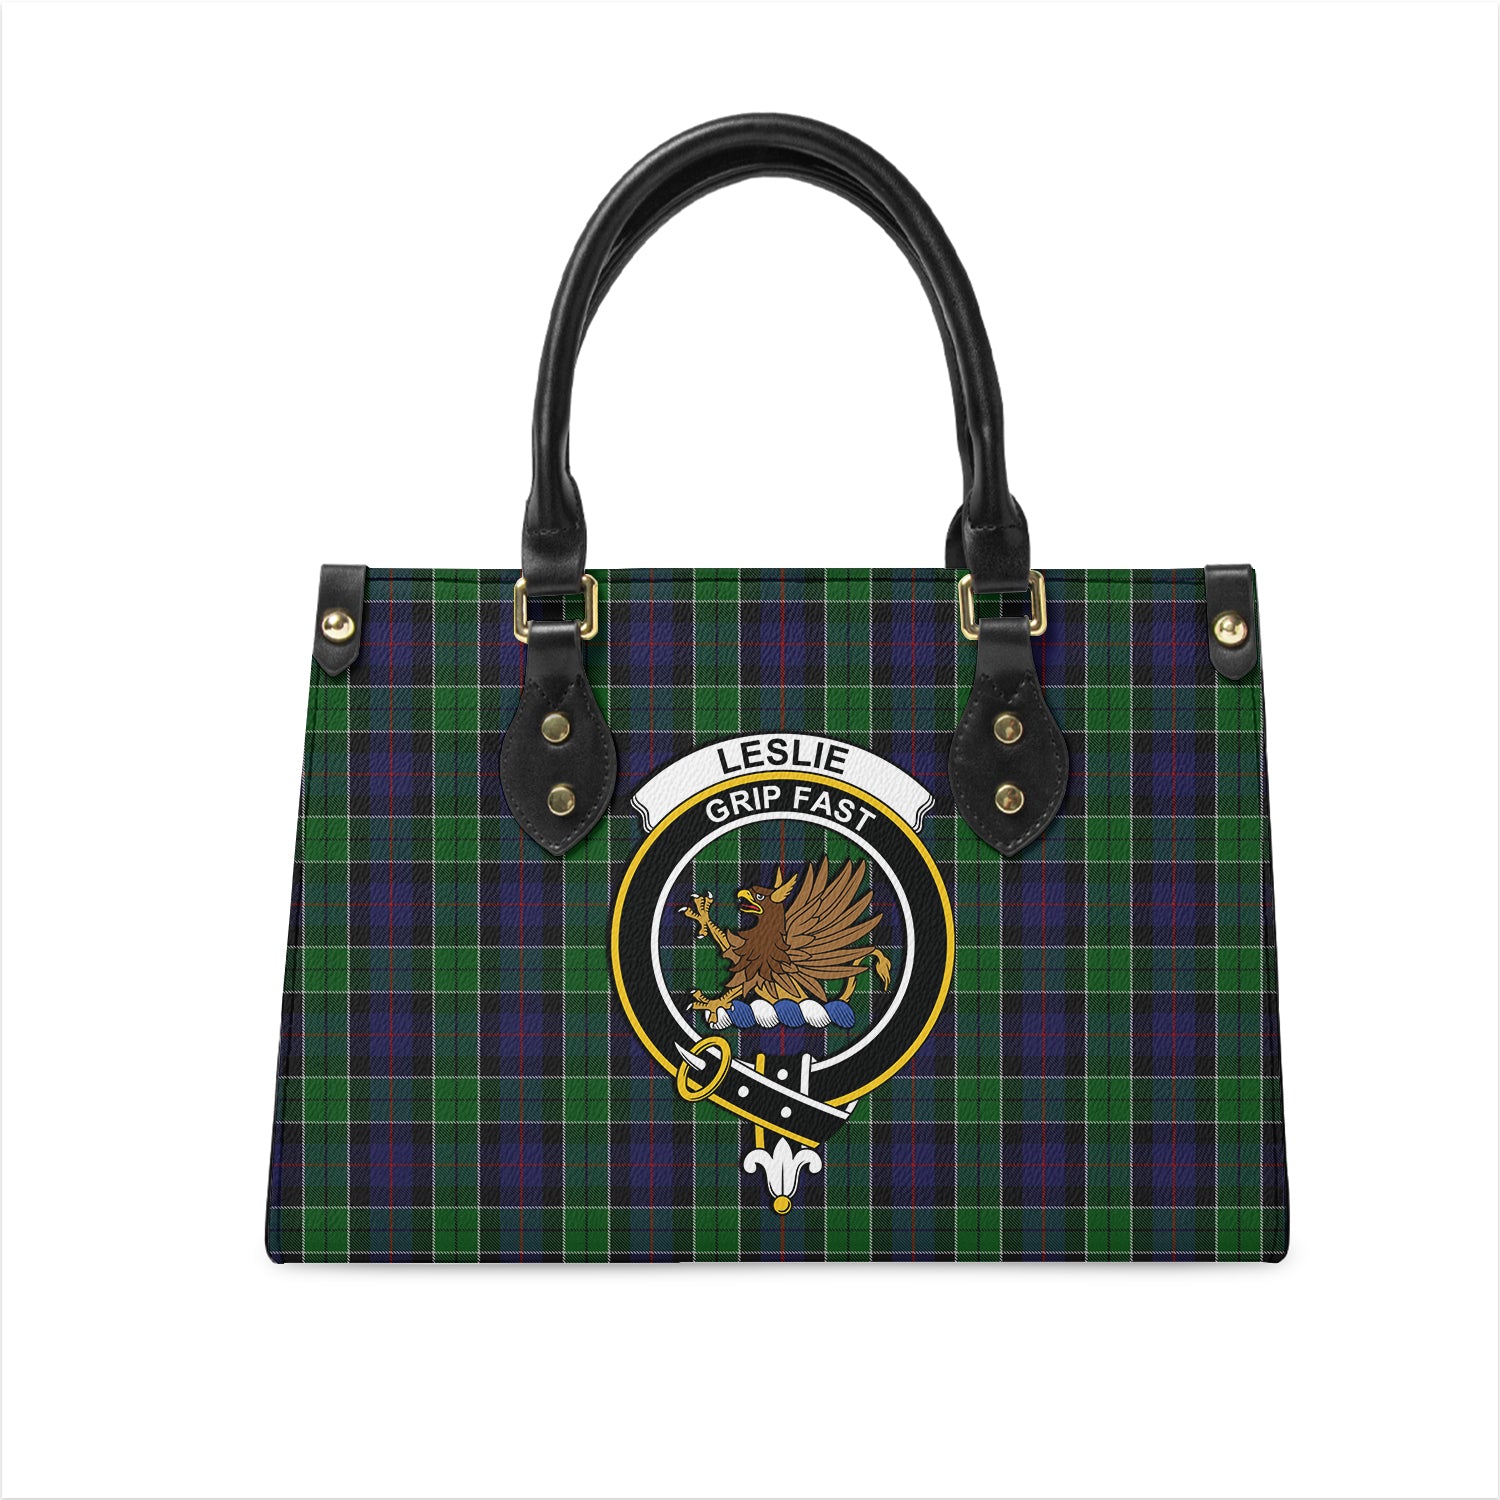 leslie-hunting-tartan-leather-bag-with-family-crest